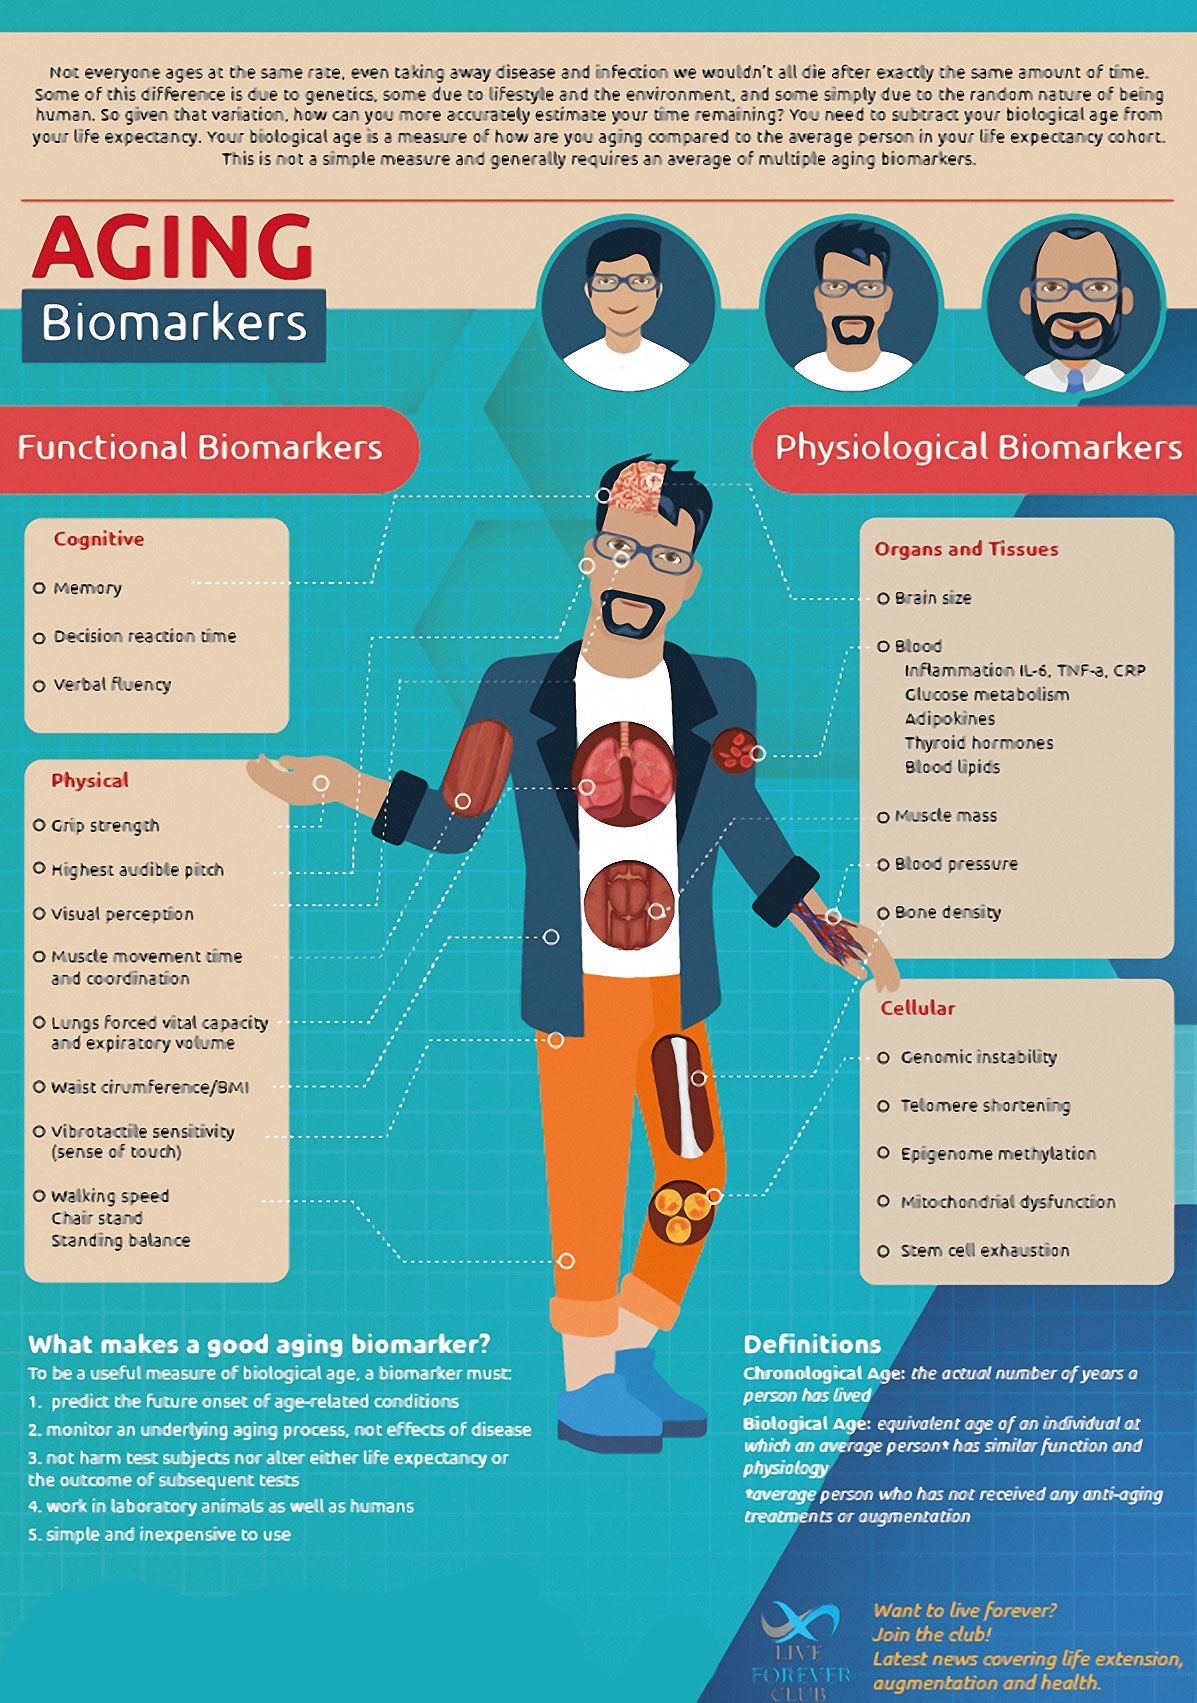 Aging Biomarkers Infographic